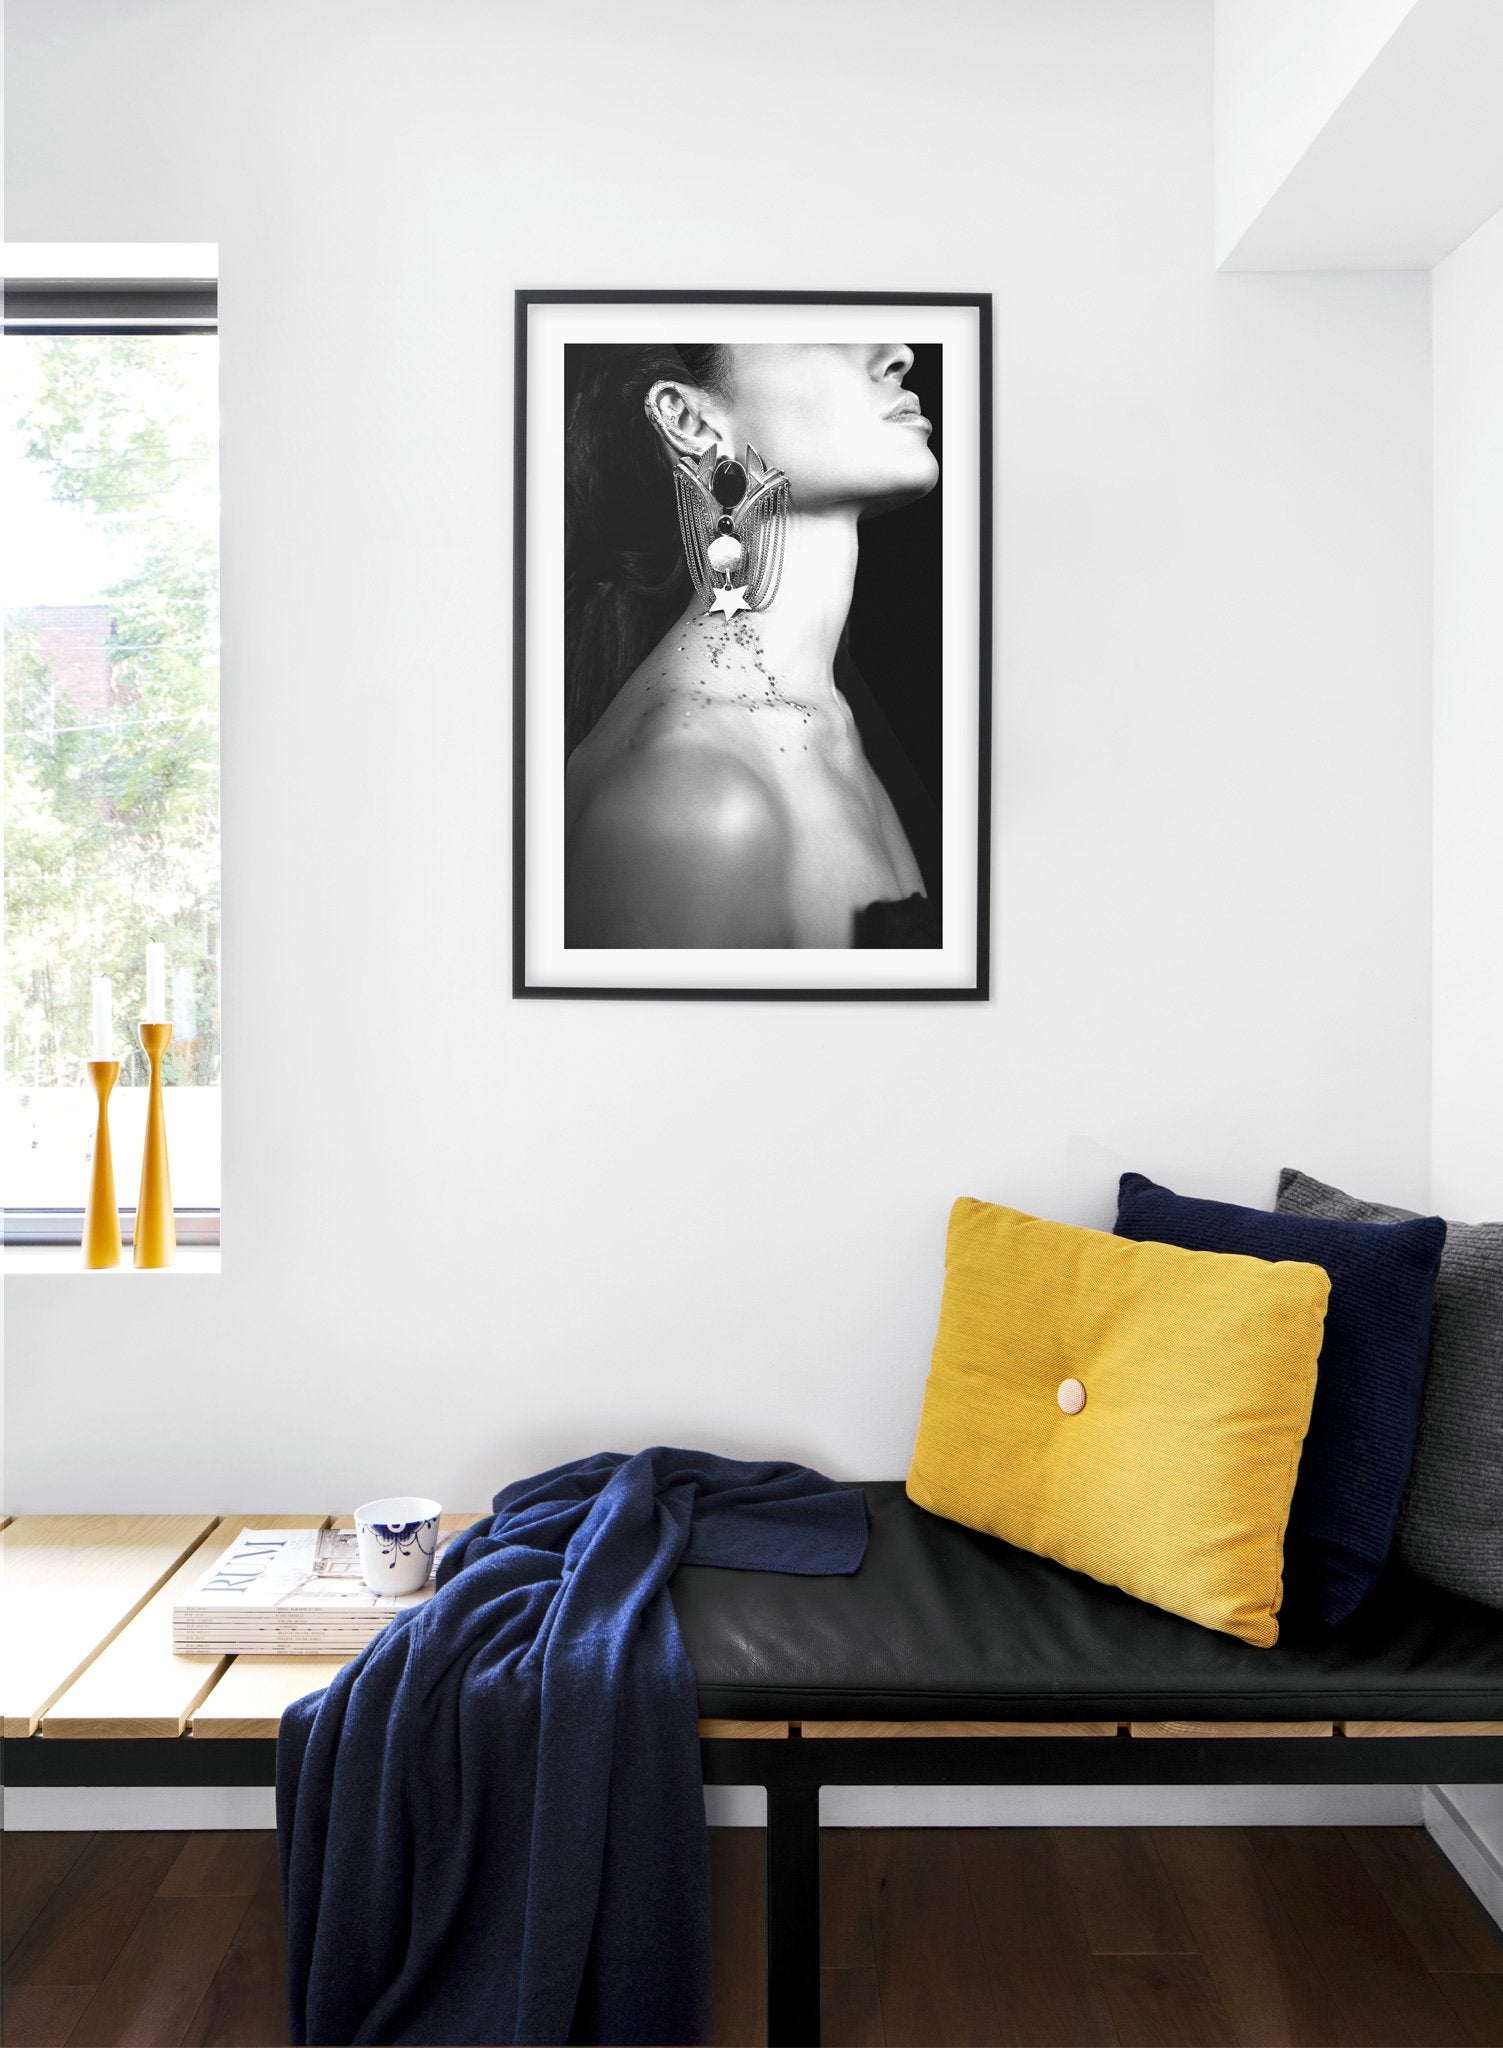 Earring modern minimalist black and white photography poster by Opposite Wall - Bedroom